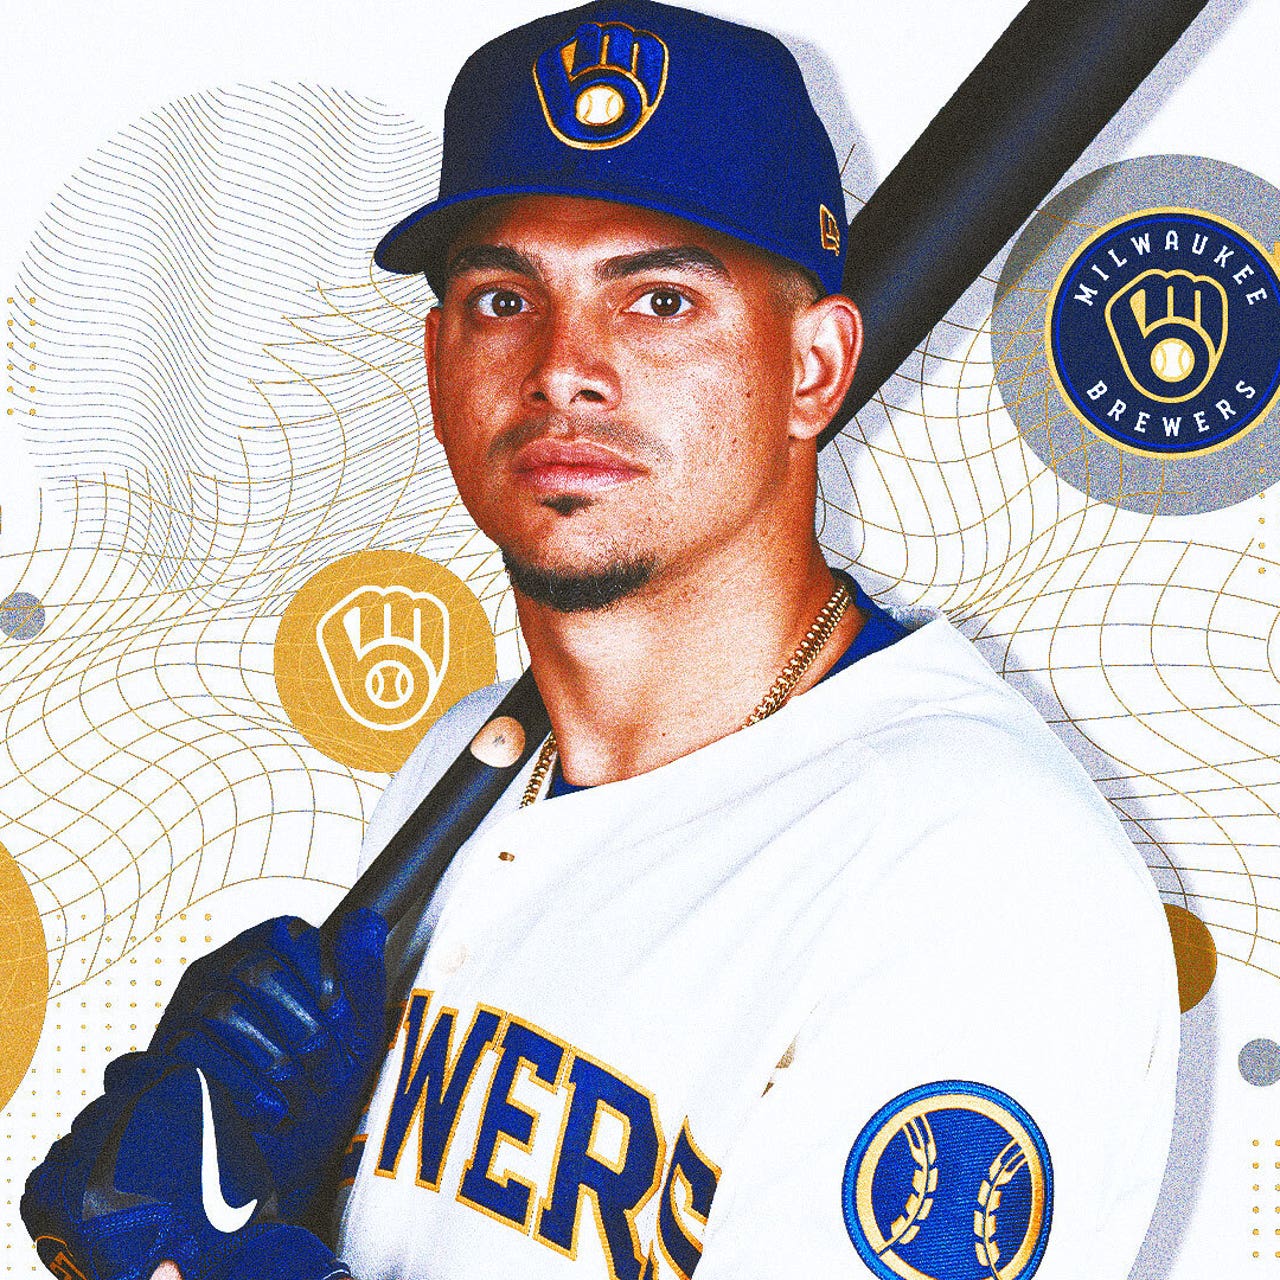 Willy Adames' rise started with final out of 2020 World Series